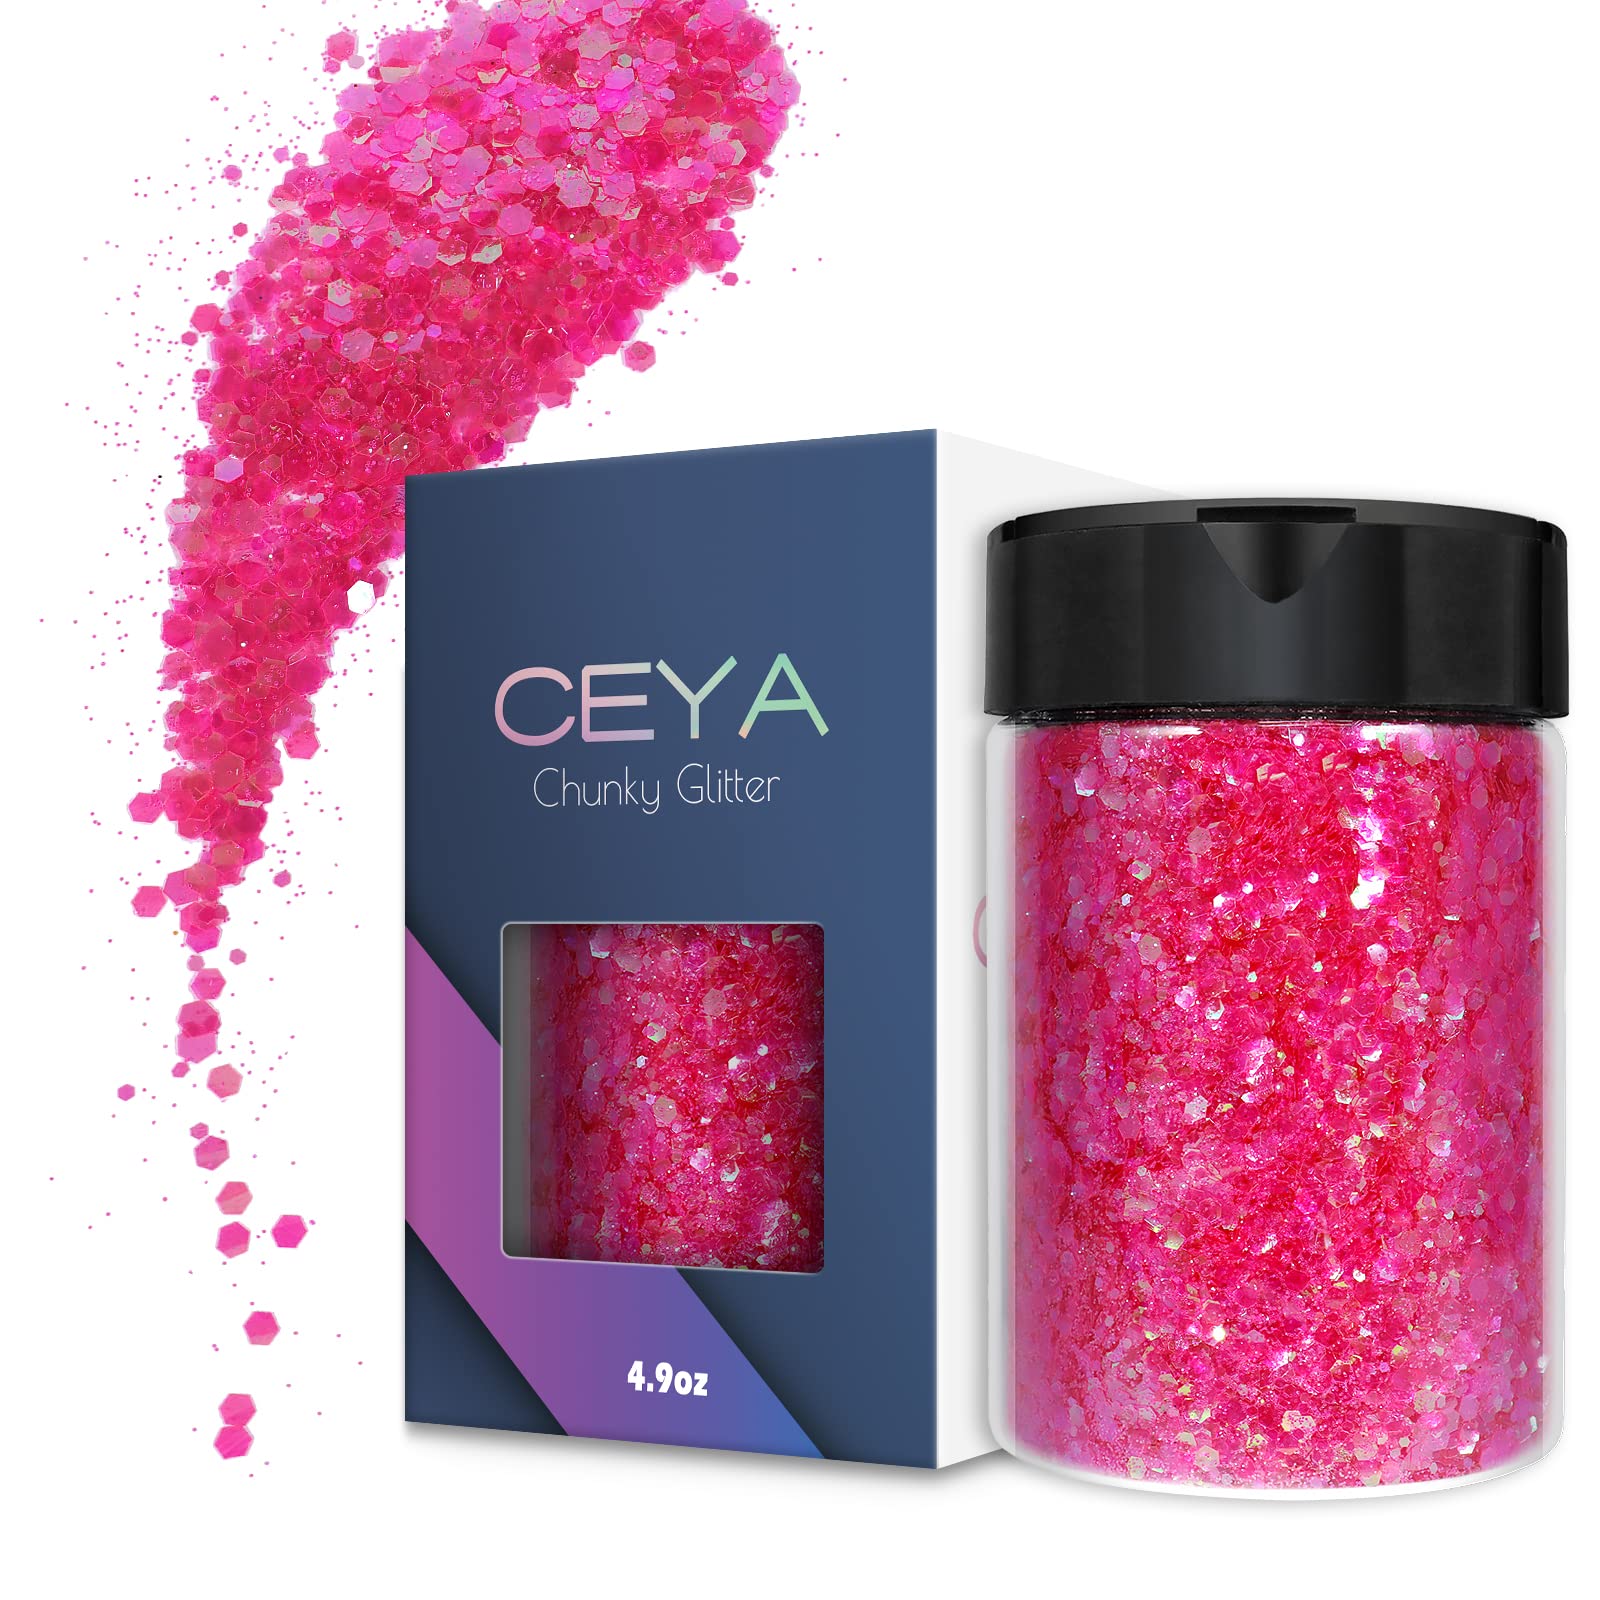 Ceya Chunky Glitter, 4.9oz/ 140g Vibrant Pink Craft Glitter Powder Mixed  Fine Flakes Iridescent Nail Sequins for Nail Art, Hair, Epoxy Resin,  Tumblers, Slime, Painting, Festival Decor